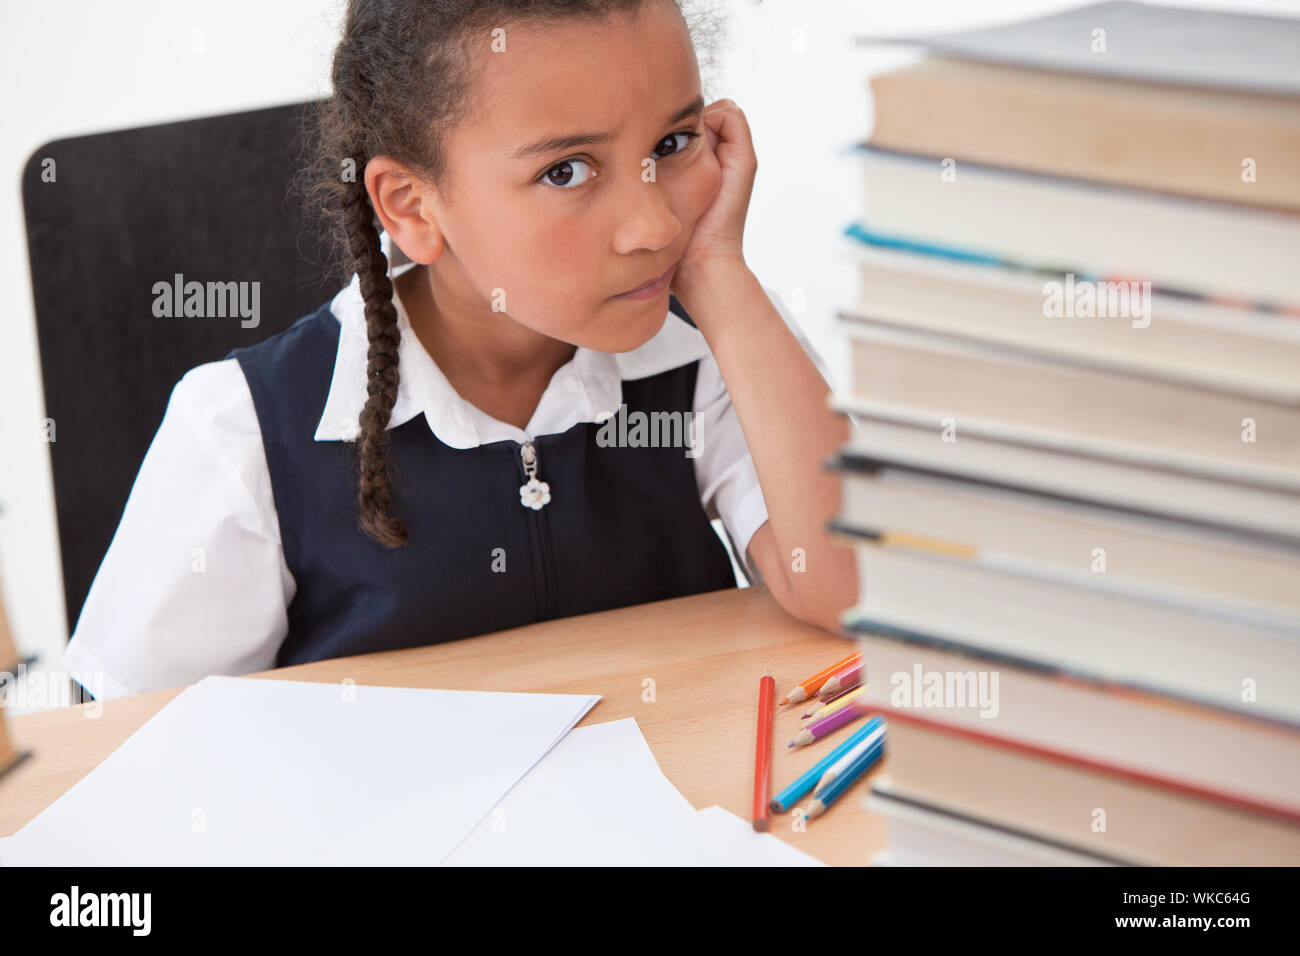 Bullying concept sad mixed race biracial African American schoolgirl or girl sitting at school desk with books, pencils and papers looking scared or d Stock Photo